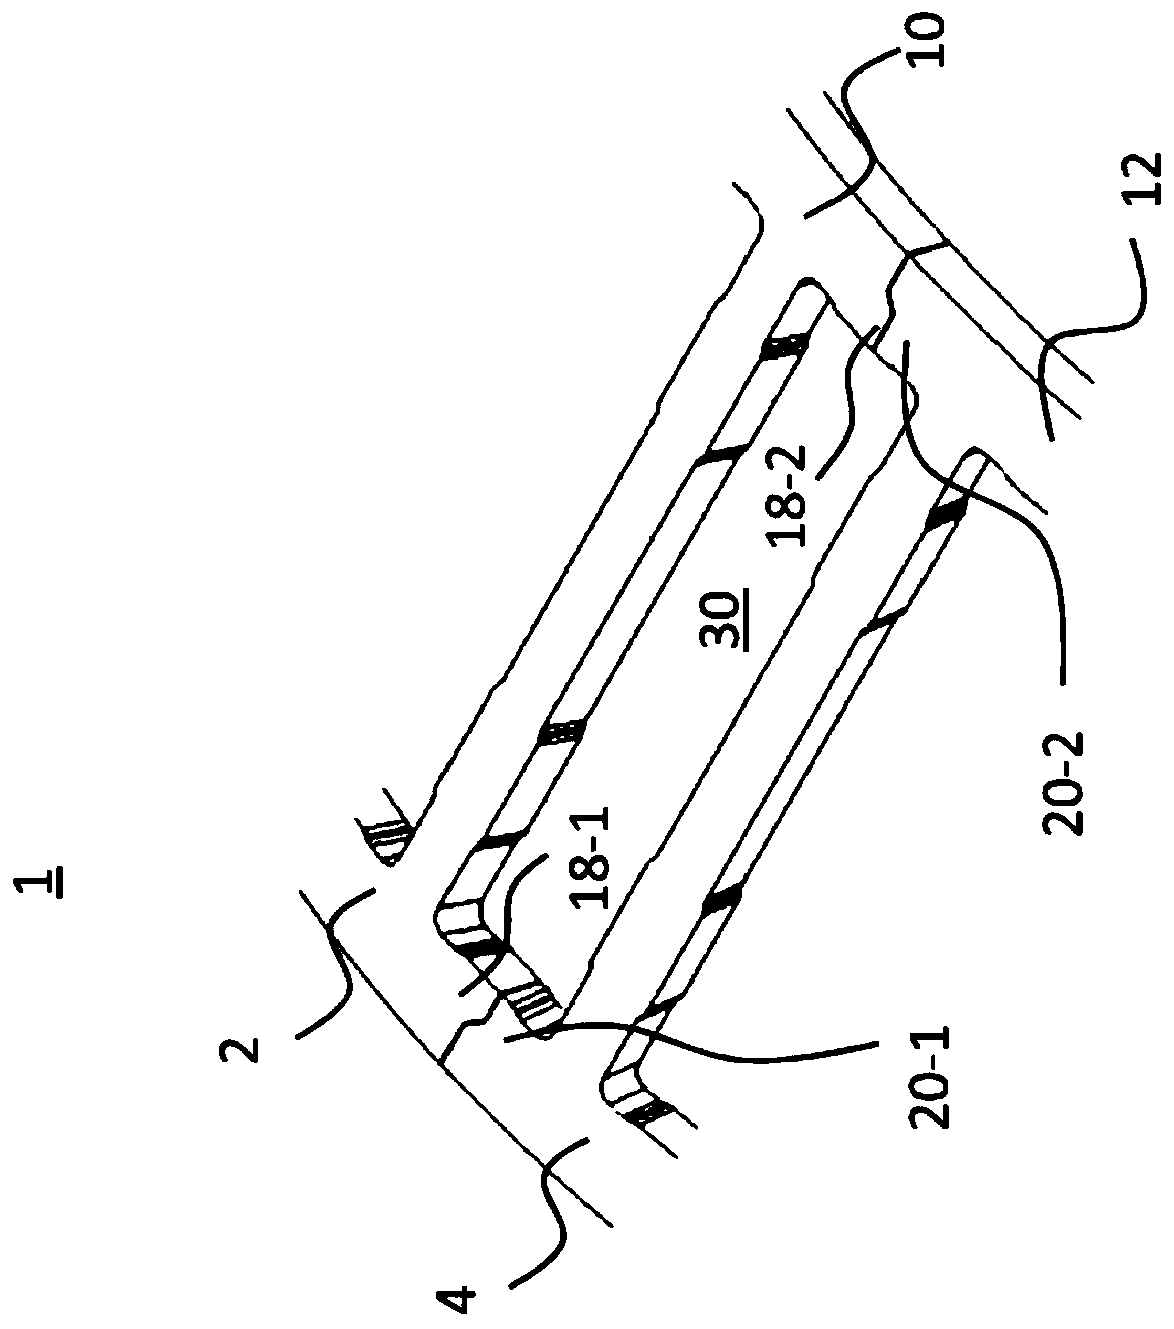 Bearing cage segment including alignment element